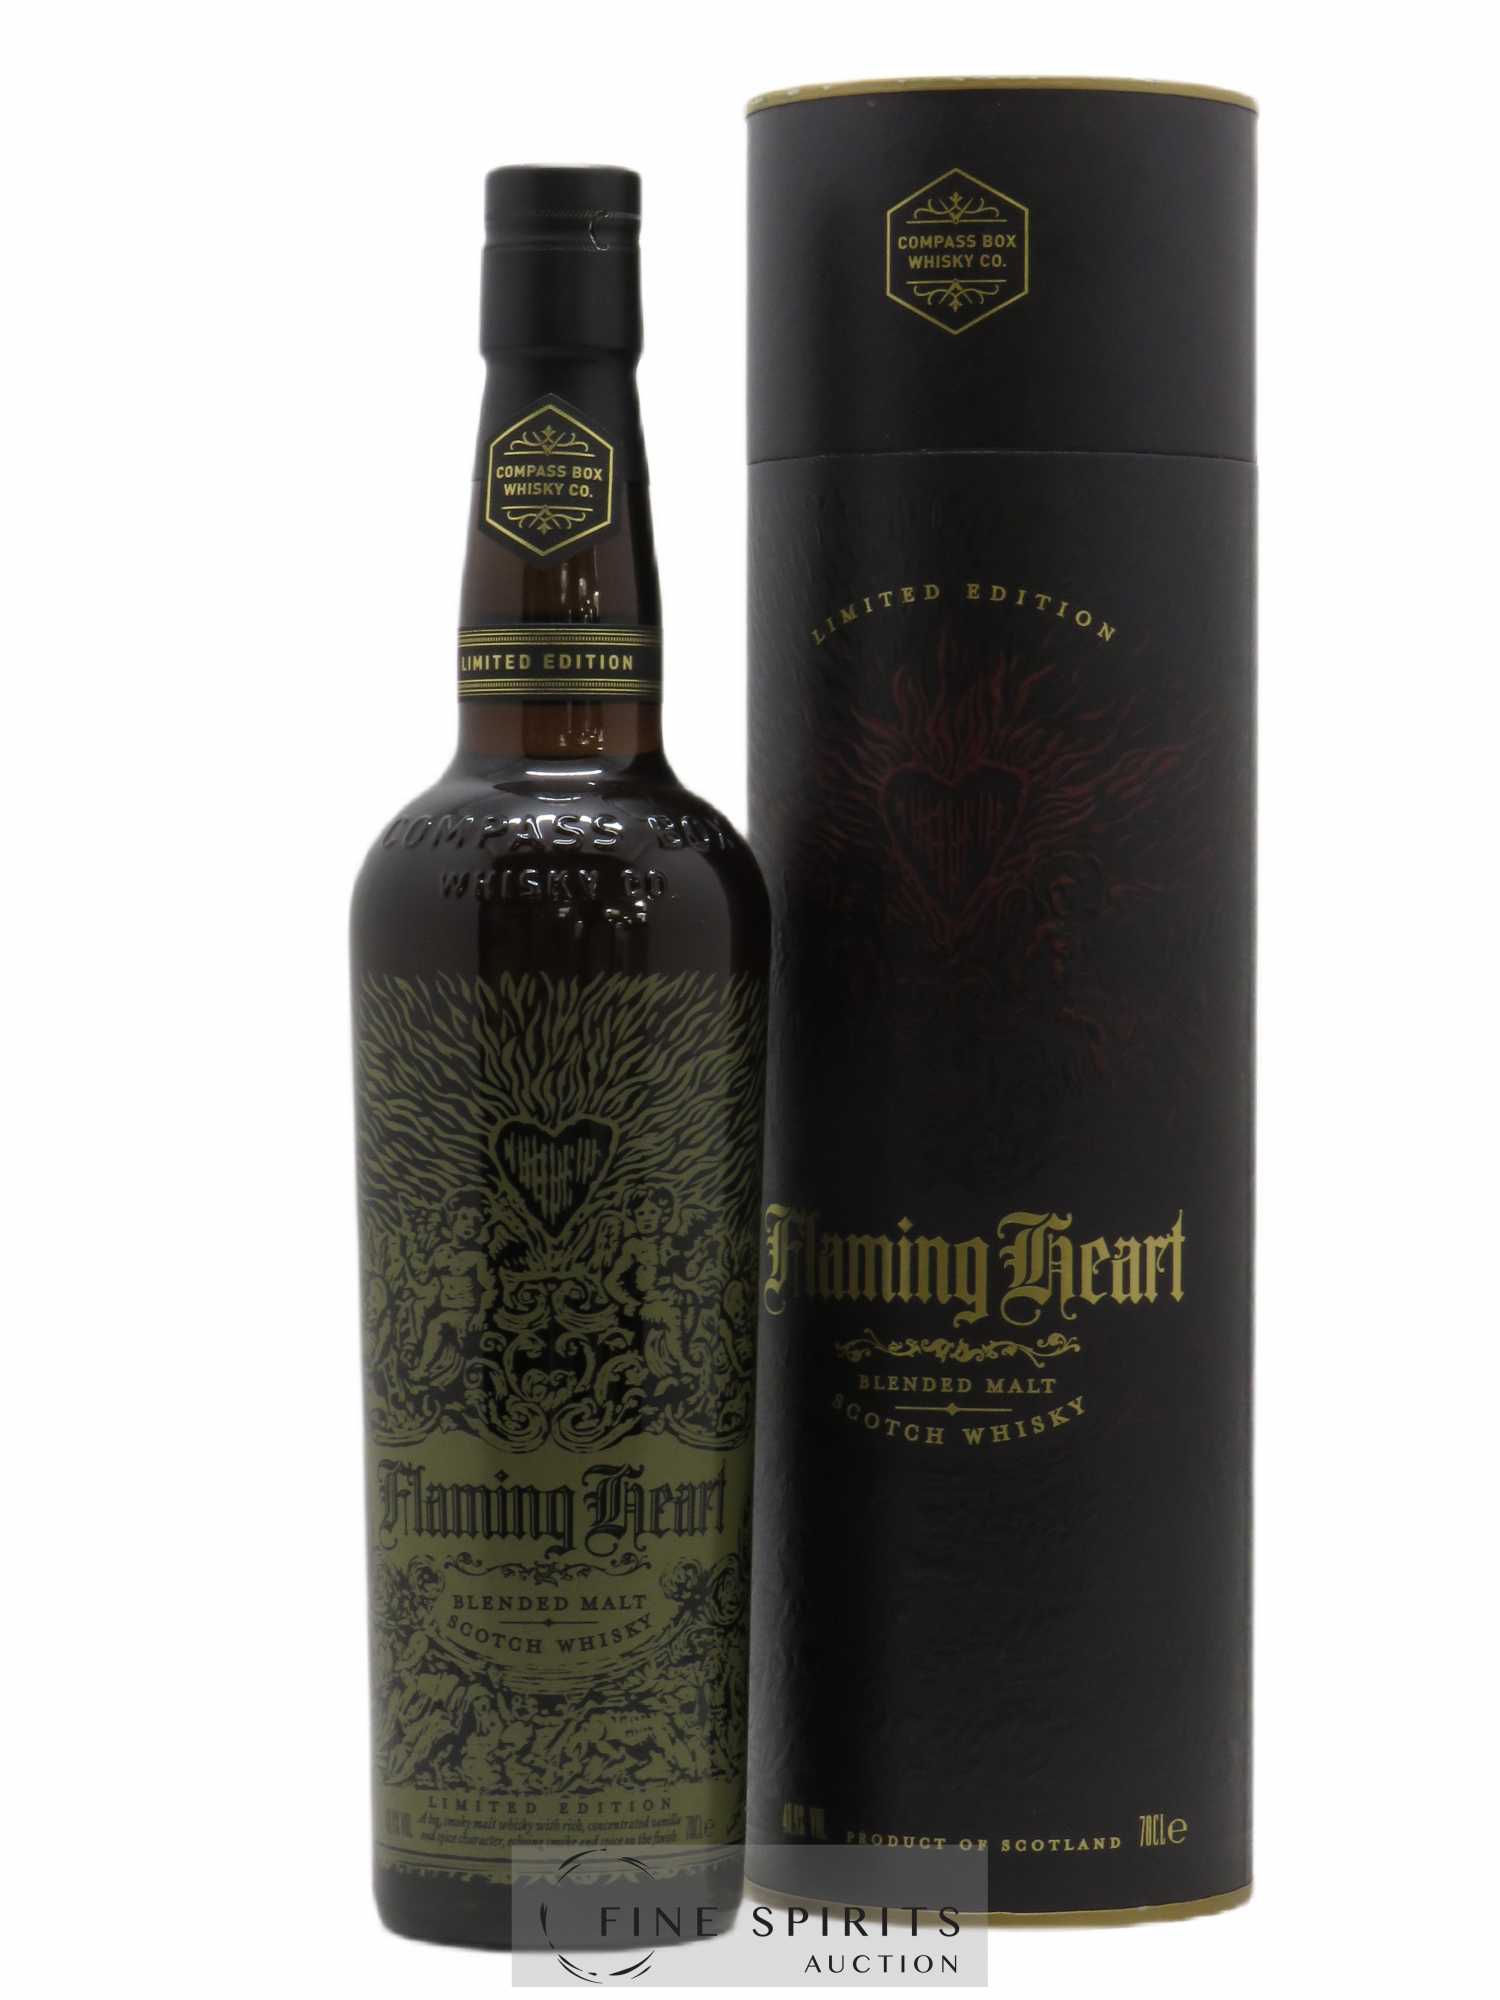 Flaming Heart Compass Box bottled 2015 Limited Edition of 12 060 bottles 